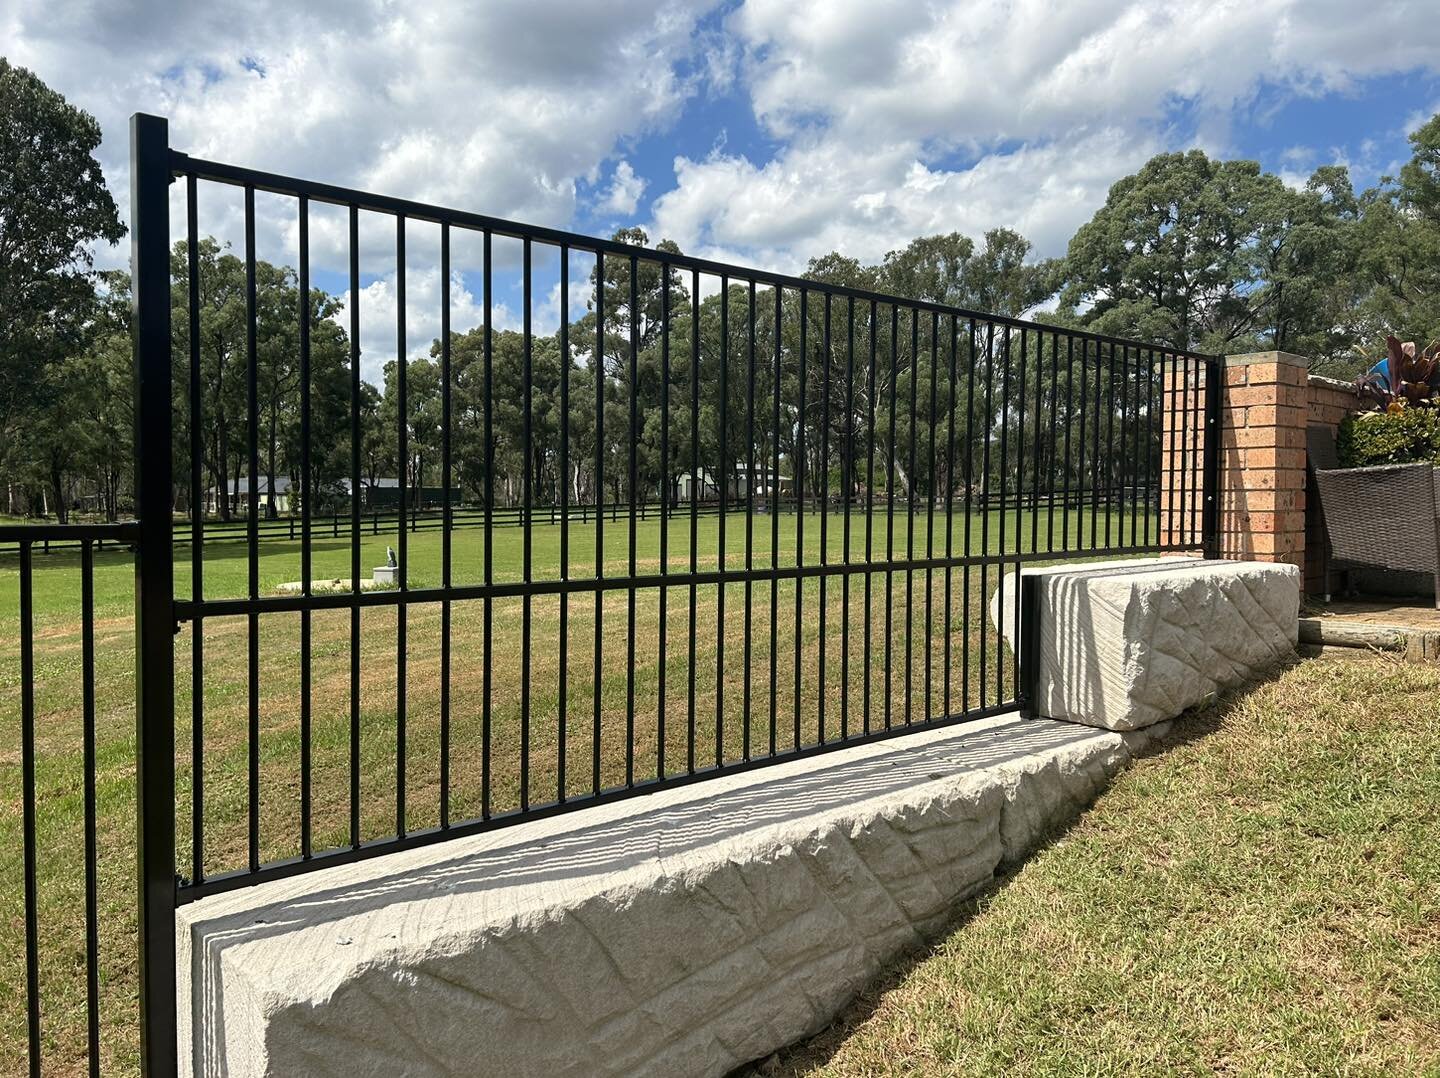 Added in an inhouse custom fabricated panel to our Kentlyn project to complete phase 1. Fabricating this means we could keep the line of the existing brick wall height and maintain this while dropping down onto the next sandstone block level. Very ha